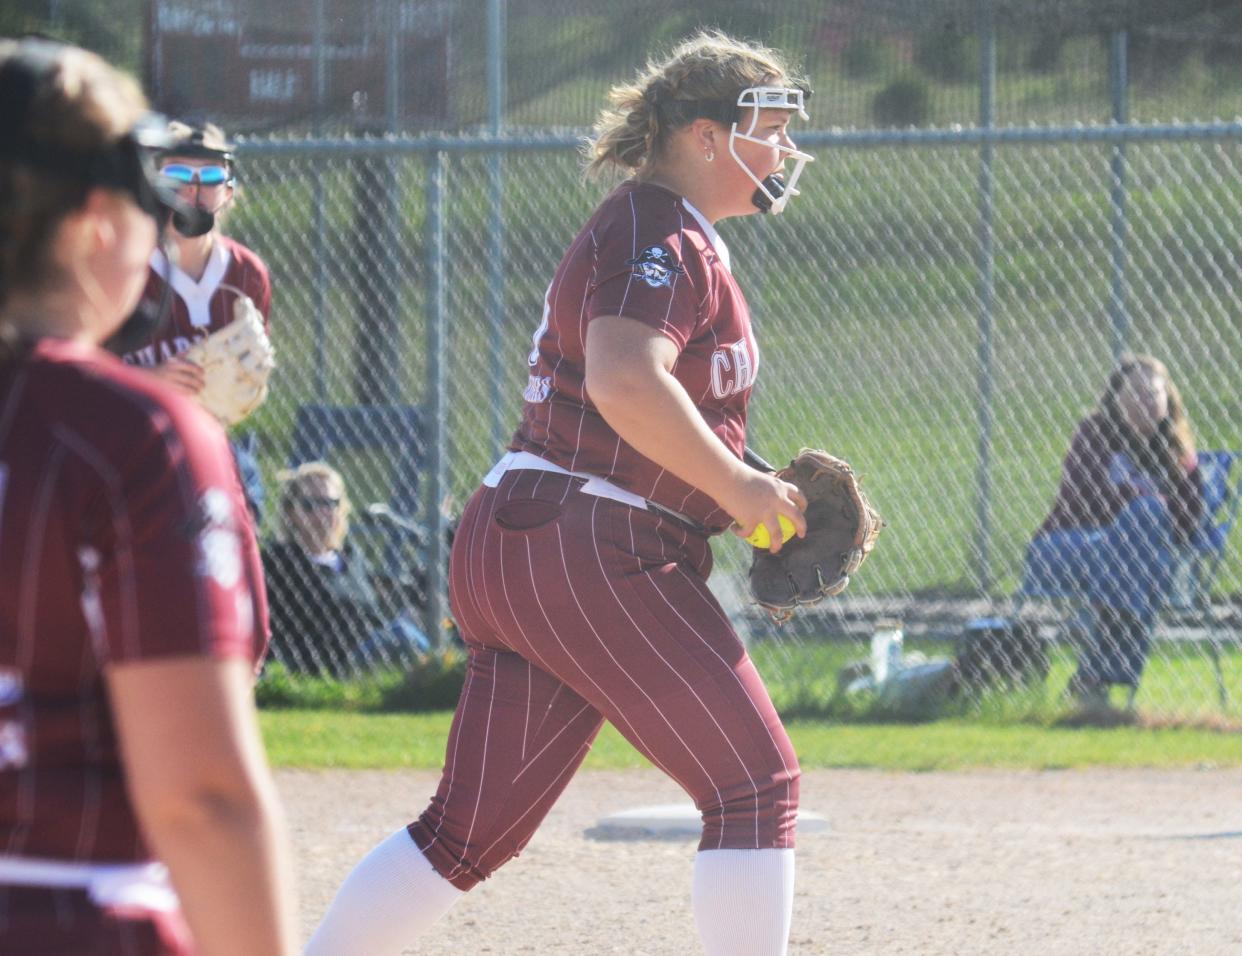 Charlevoix's Mary Lentz put herself in the top performers list with a standout showing over the weekend.